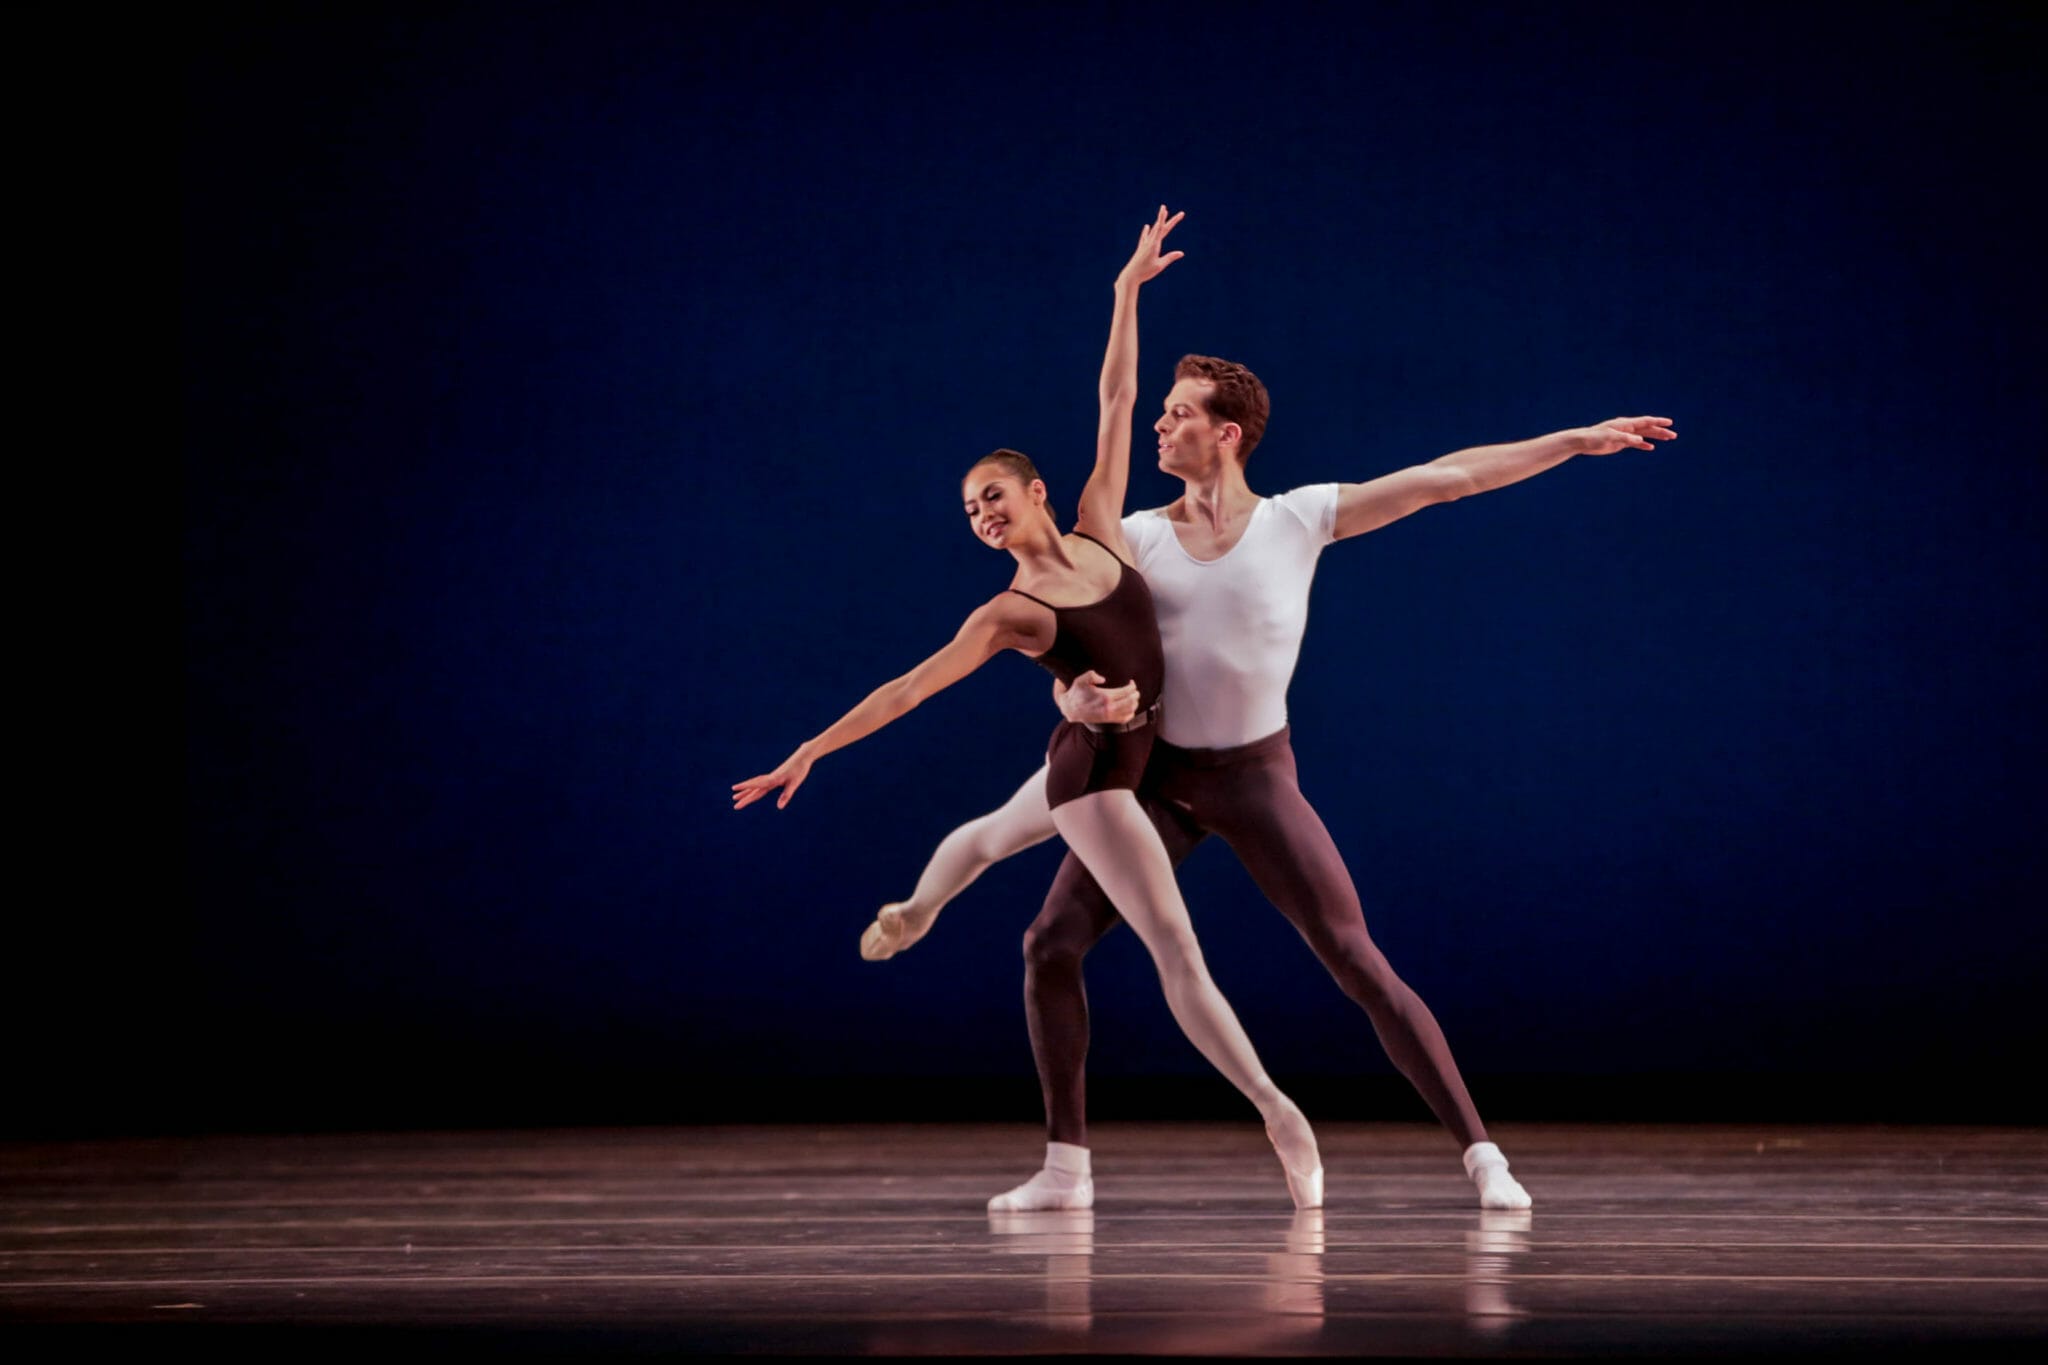 The Four Temperaments performed by Christine Rocas and Dylan Gutierrez. Photo by Cheryl Mann